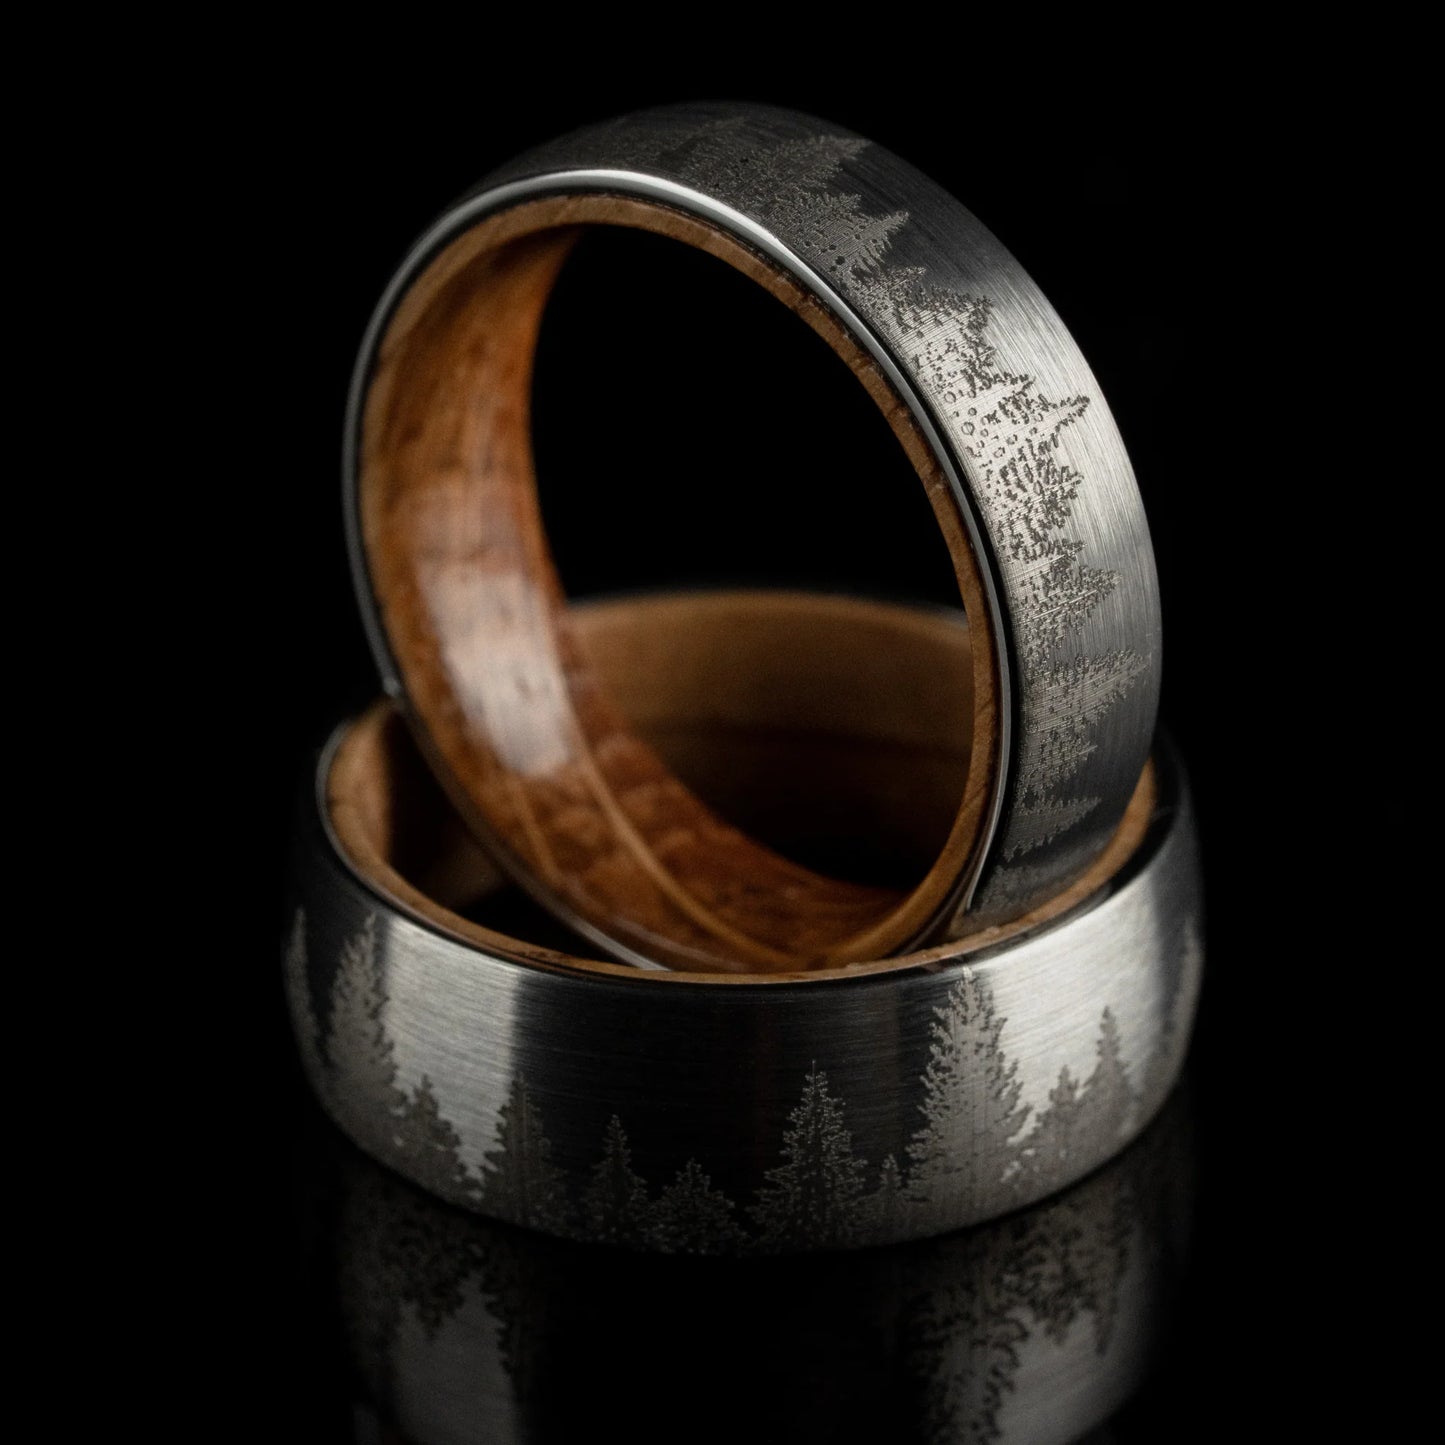 The "Outdoorsman" Ring